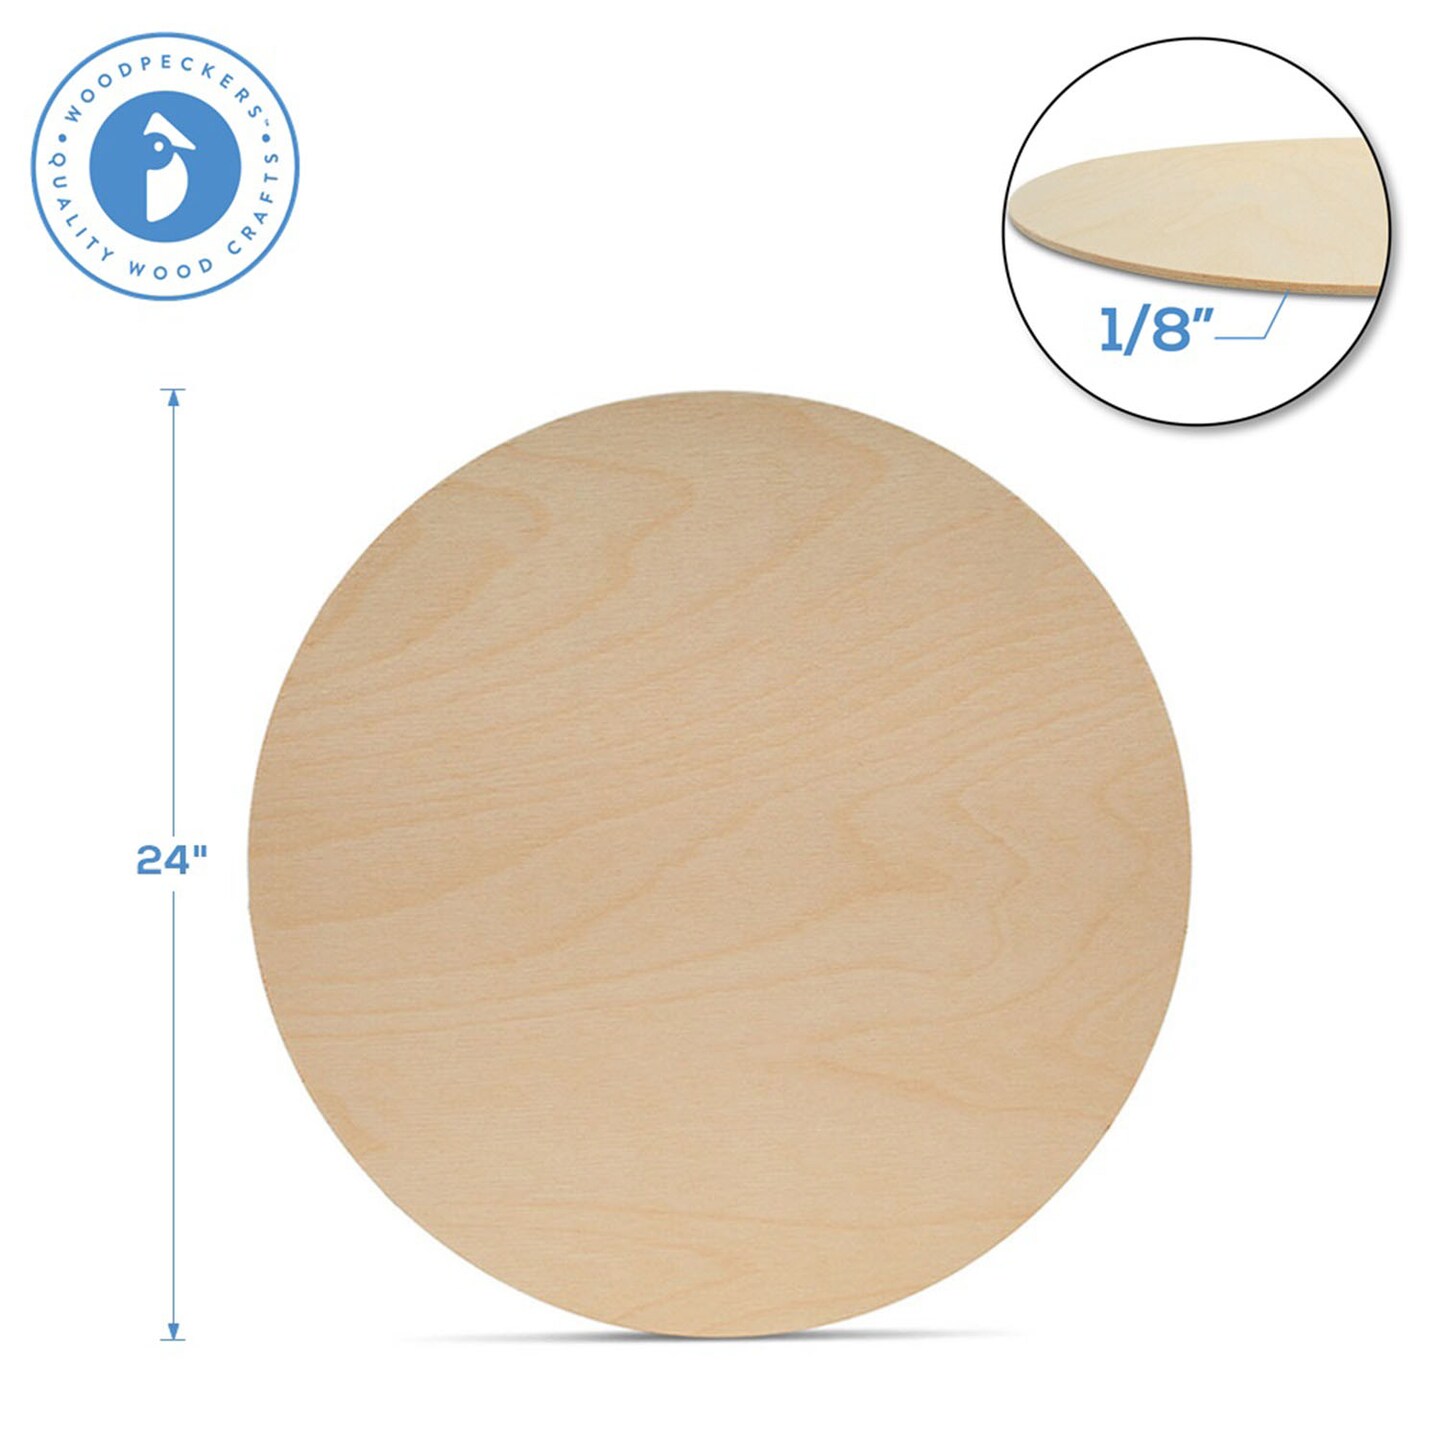 Wood Circles 12 inch, 1/4 Inch Thick, Birch Plywood Discs, Pack of 5  Unfinished Wood Circles for Crafts, Wood Rounds by Woodpeckers